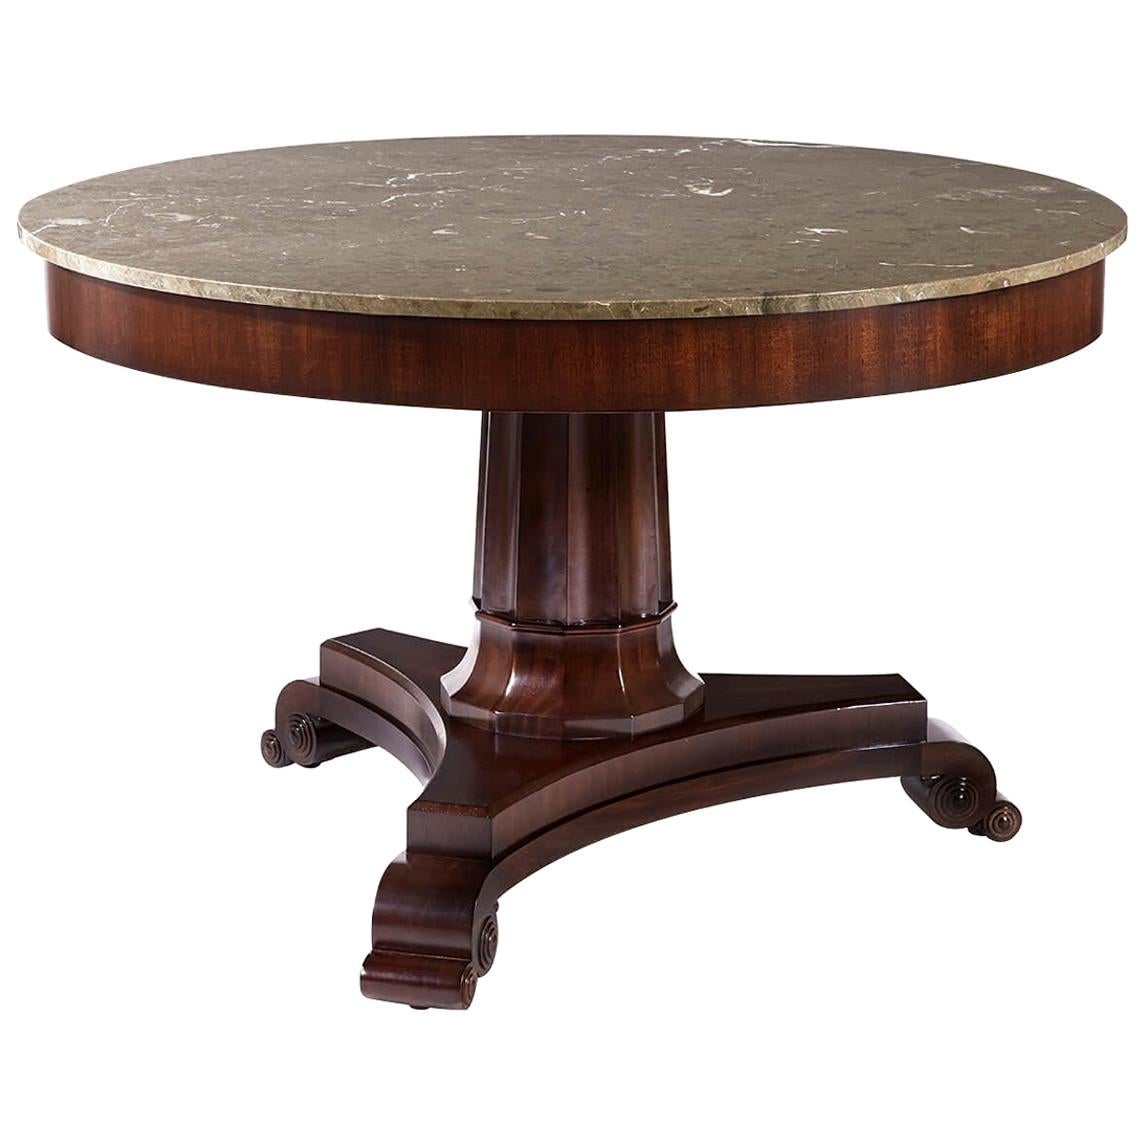 Classical Round Center Table